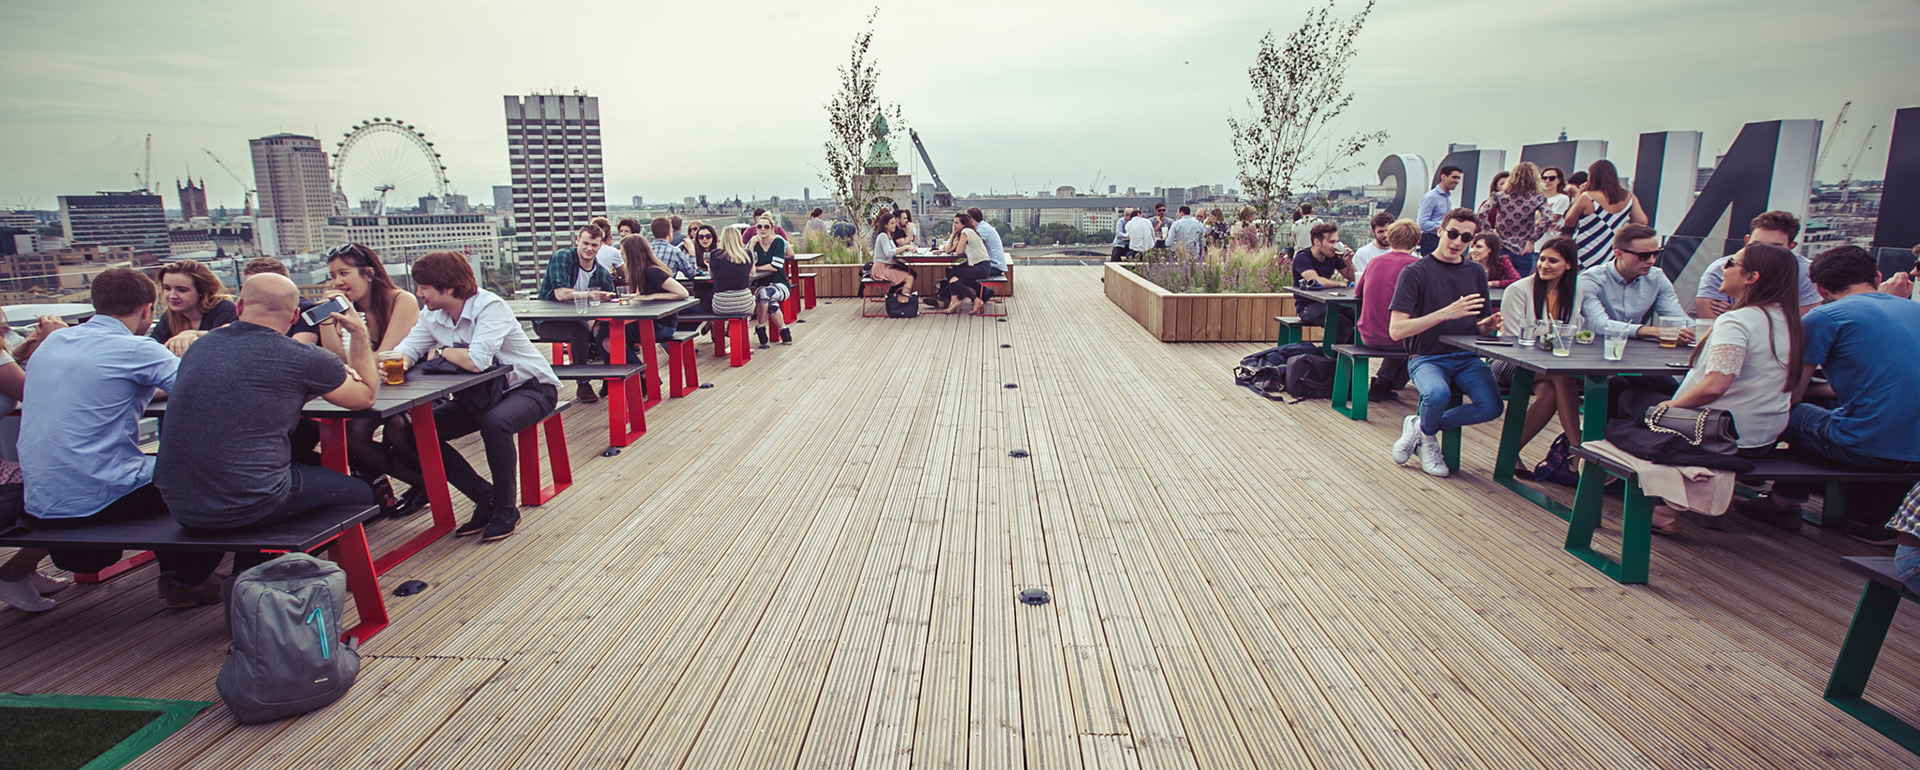 Daytime event on the roof terrace